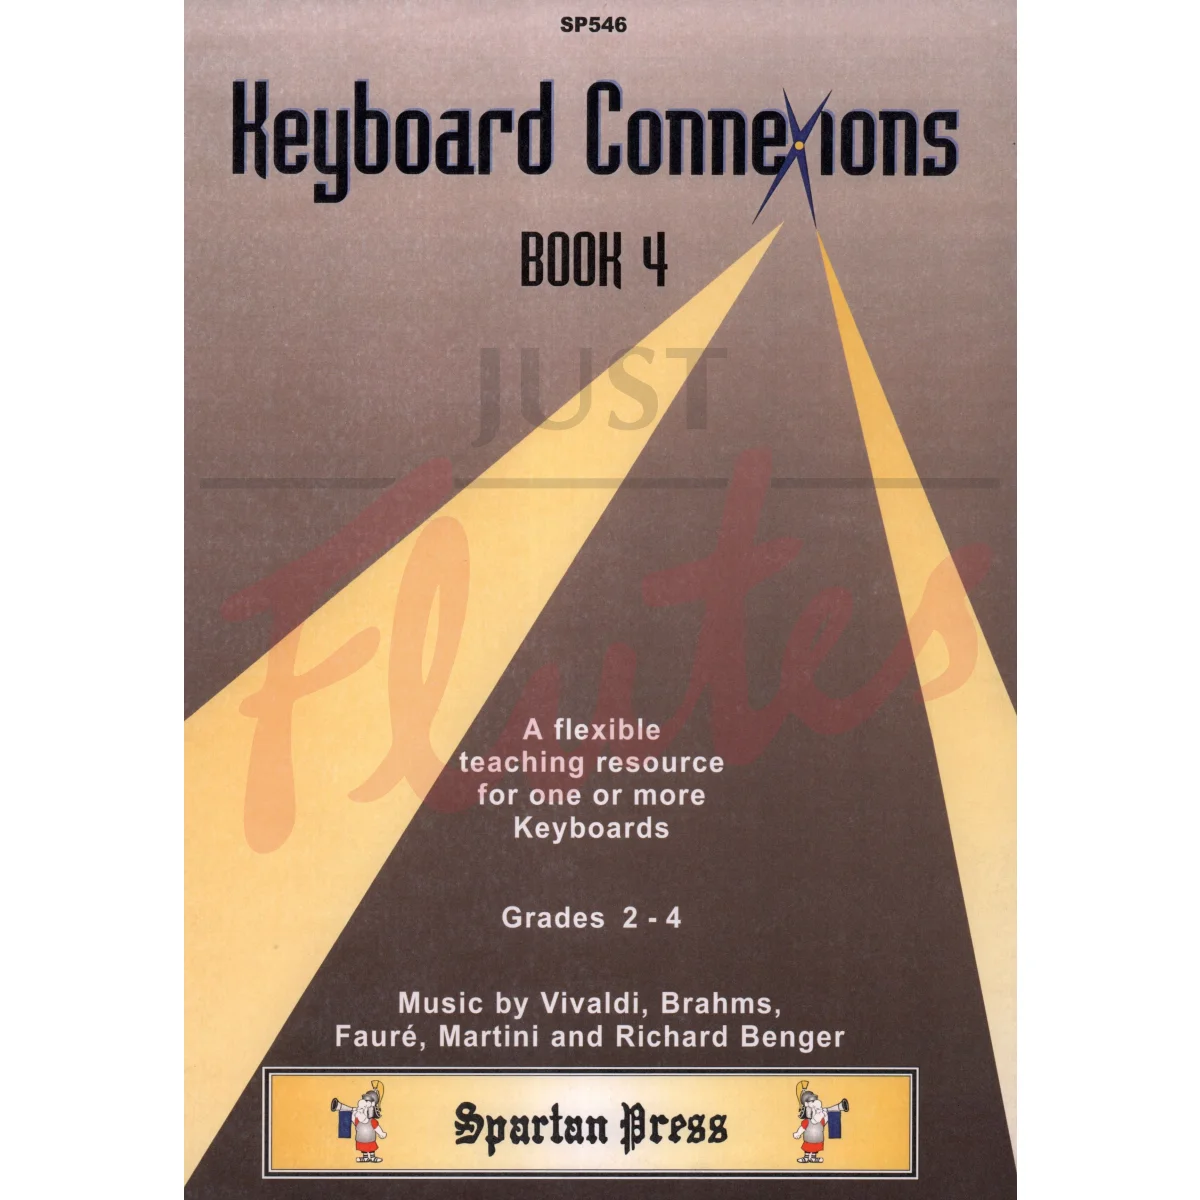 Keyboard Connexions Book 4